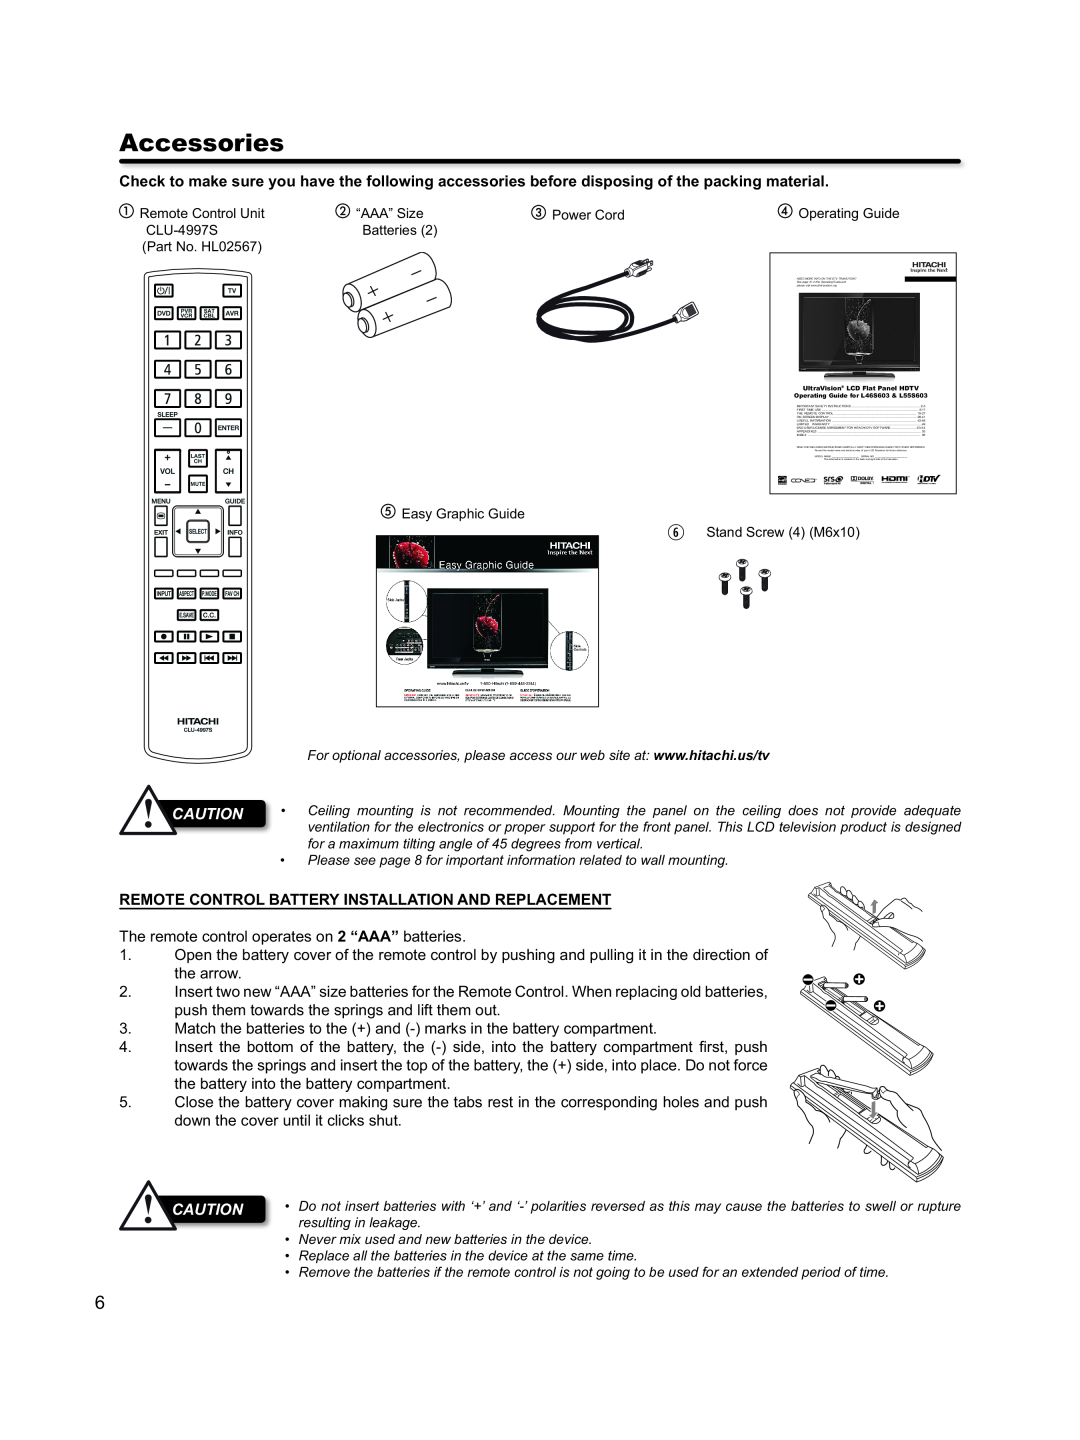 Hitachi L46S603 important safety instructions Accessories, Remote Control Battery Installation And Replacement 